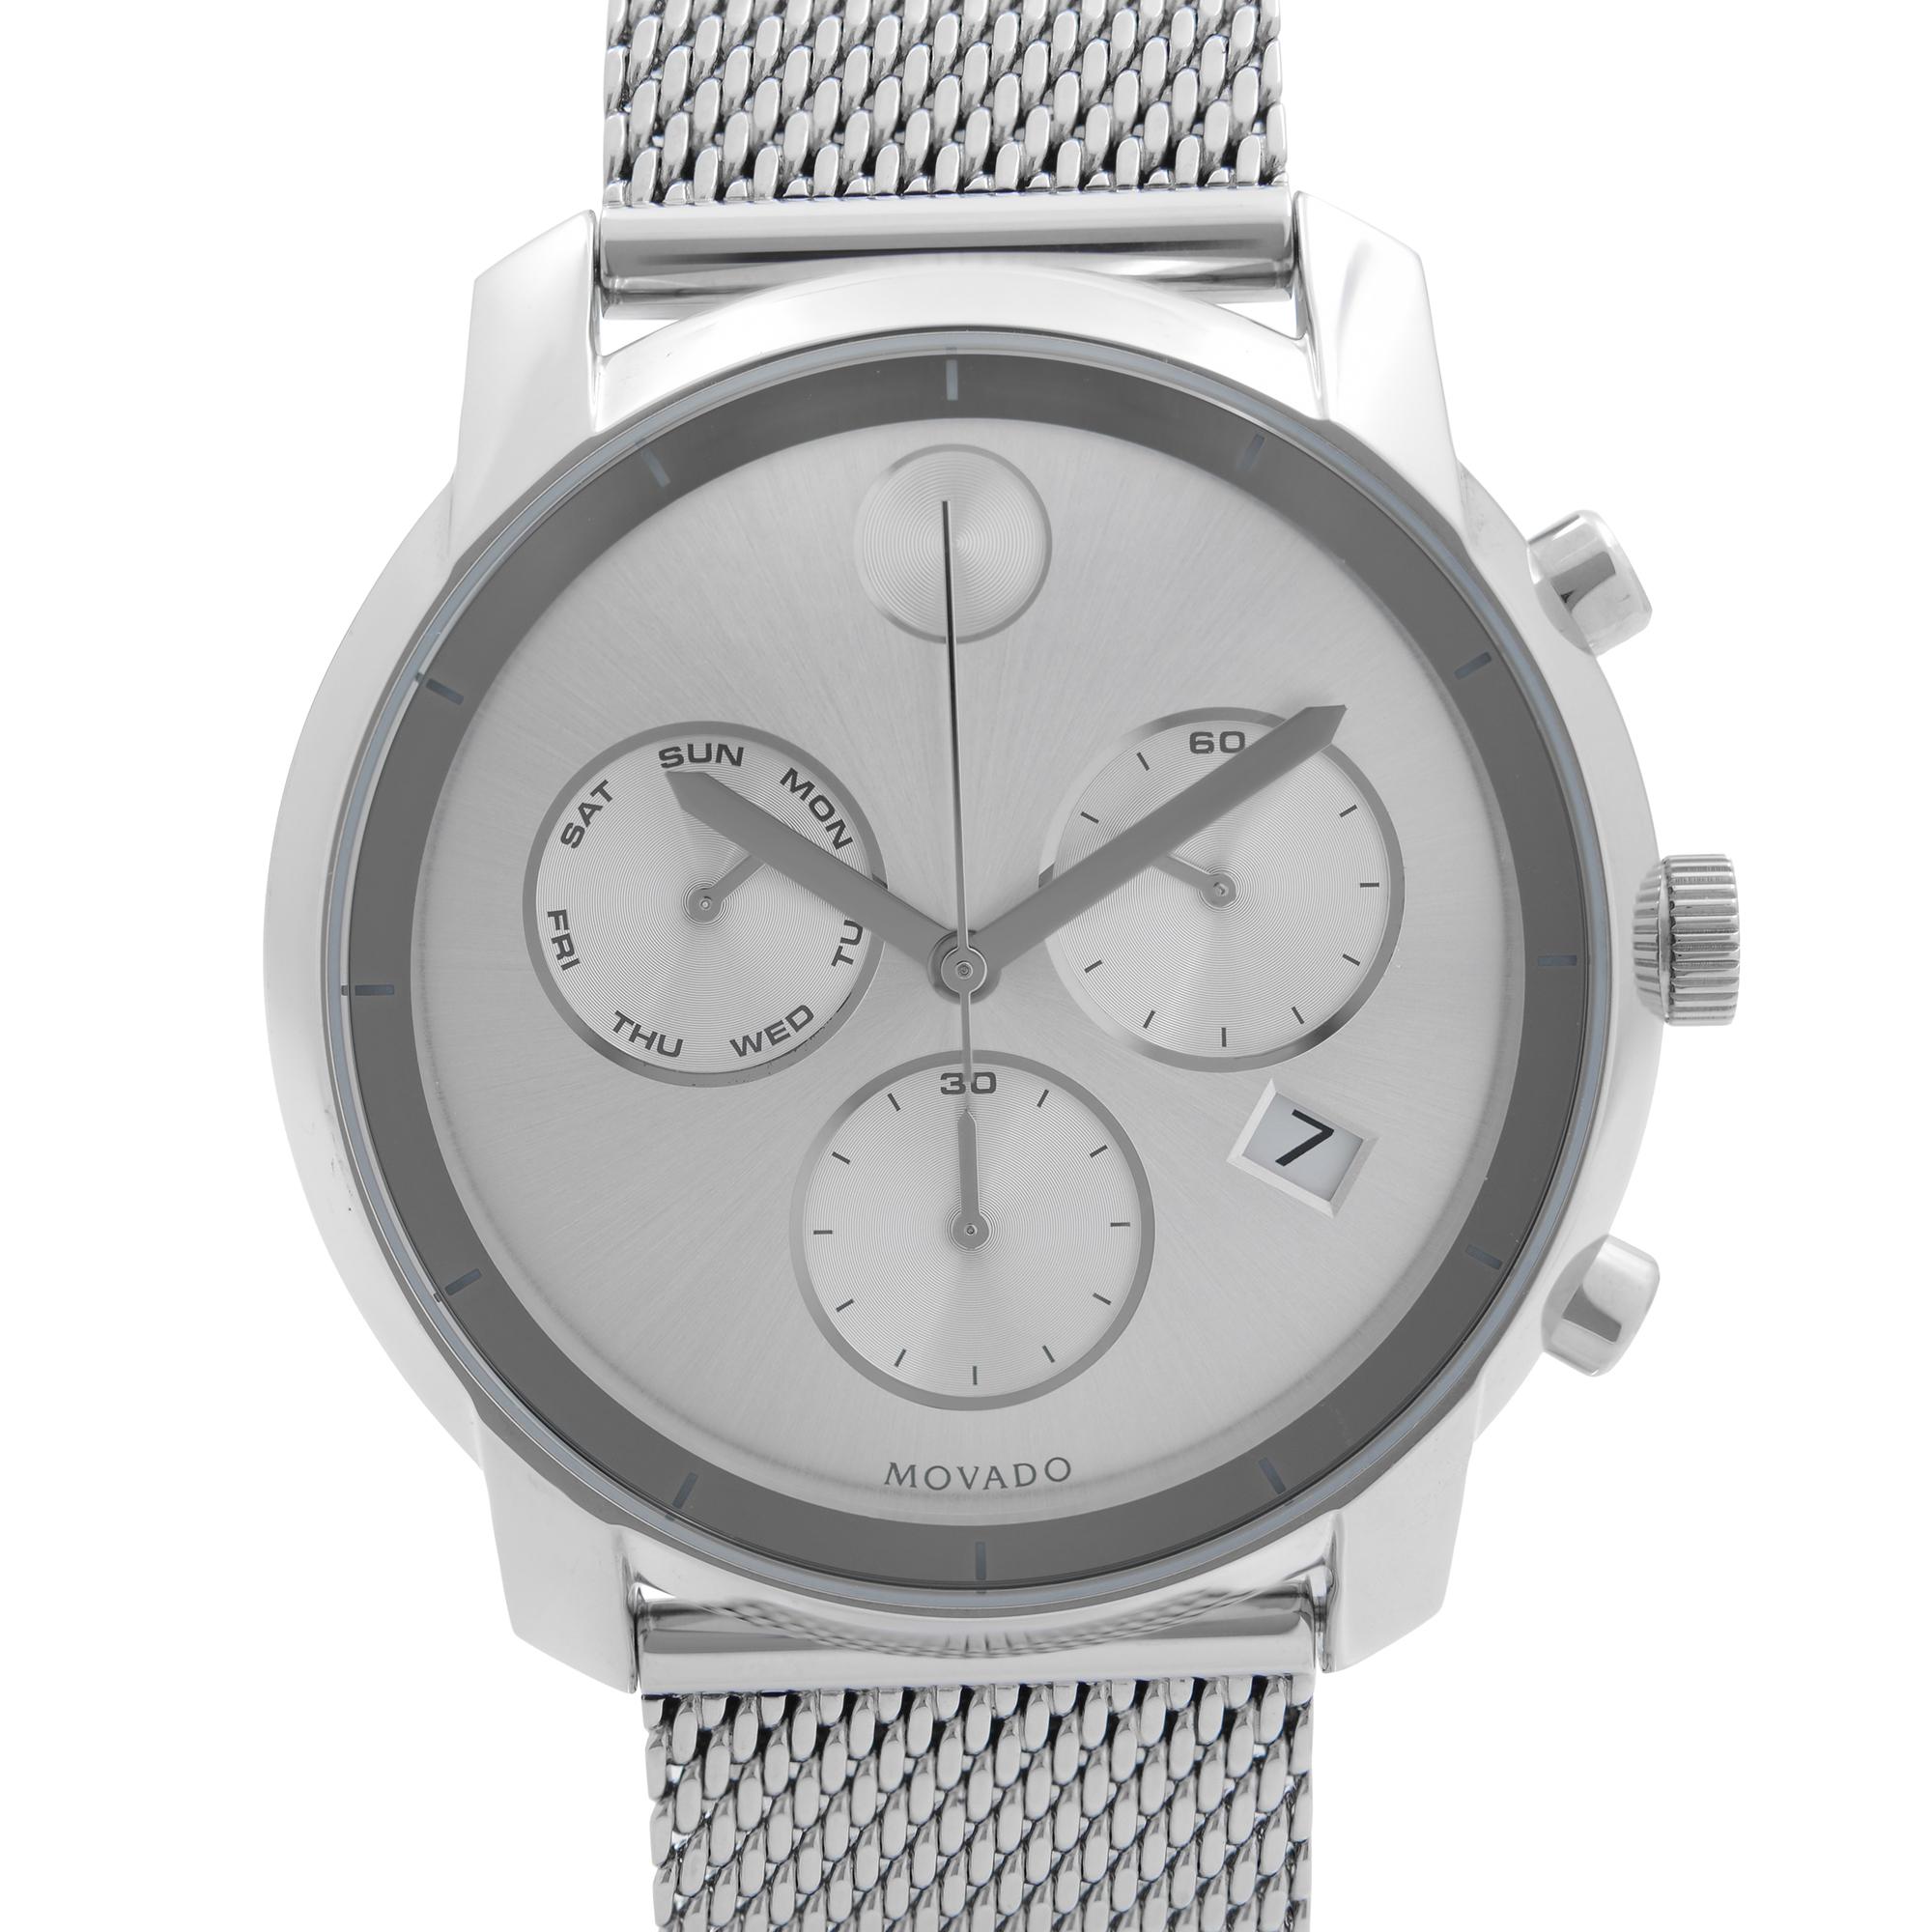 Unworn Movado Bold Chronograph Stainless Steel Silver Dial Quartz Men's Watch 3600371. This Beautiful Timepiece Features: Stainless Steel Case with a Mesh Stainless Steel Bracelet, Fixed Stainless Steel Bezel, Silver Dial with Silver-Tone Hands, And